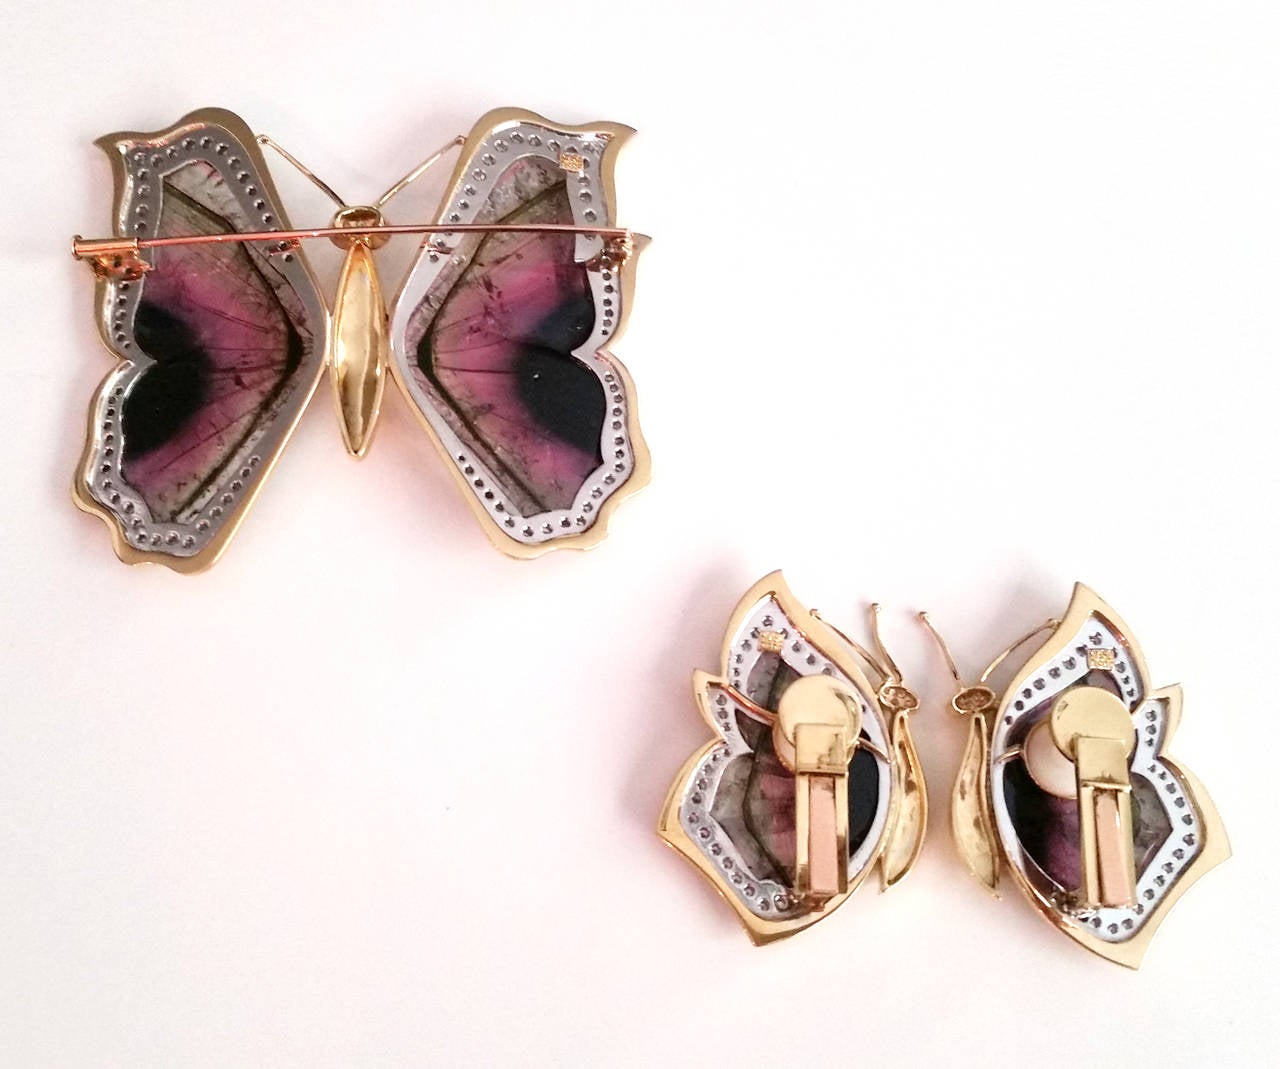 Watermelon Tourmaline Diamond Gold Earrings and Brooch Butterfly Suite For Sale 2